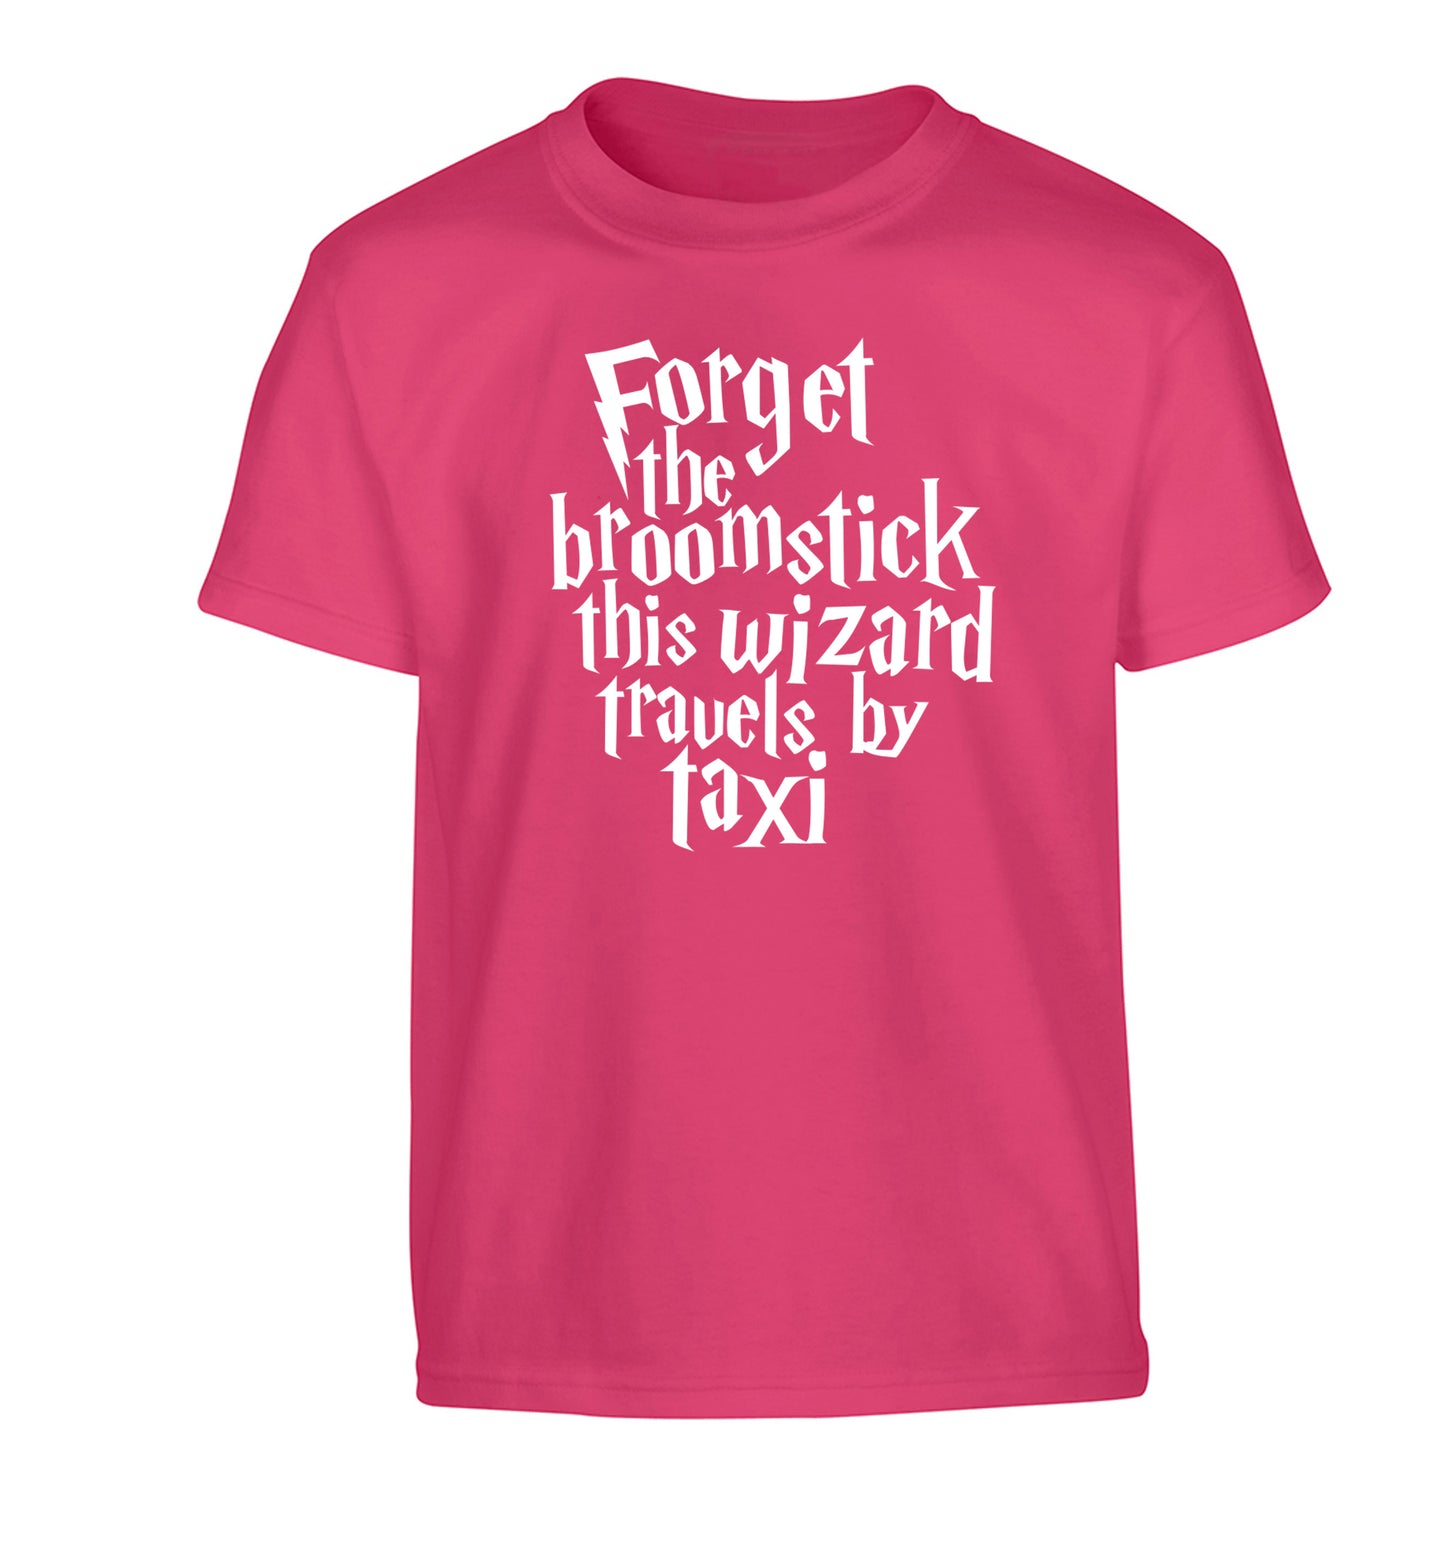 Forget the broomstick this wizard travels by taxi Children's pink Tshirt 12-14 Years